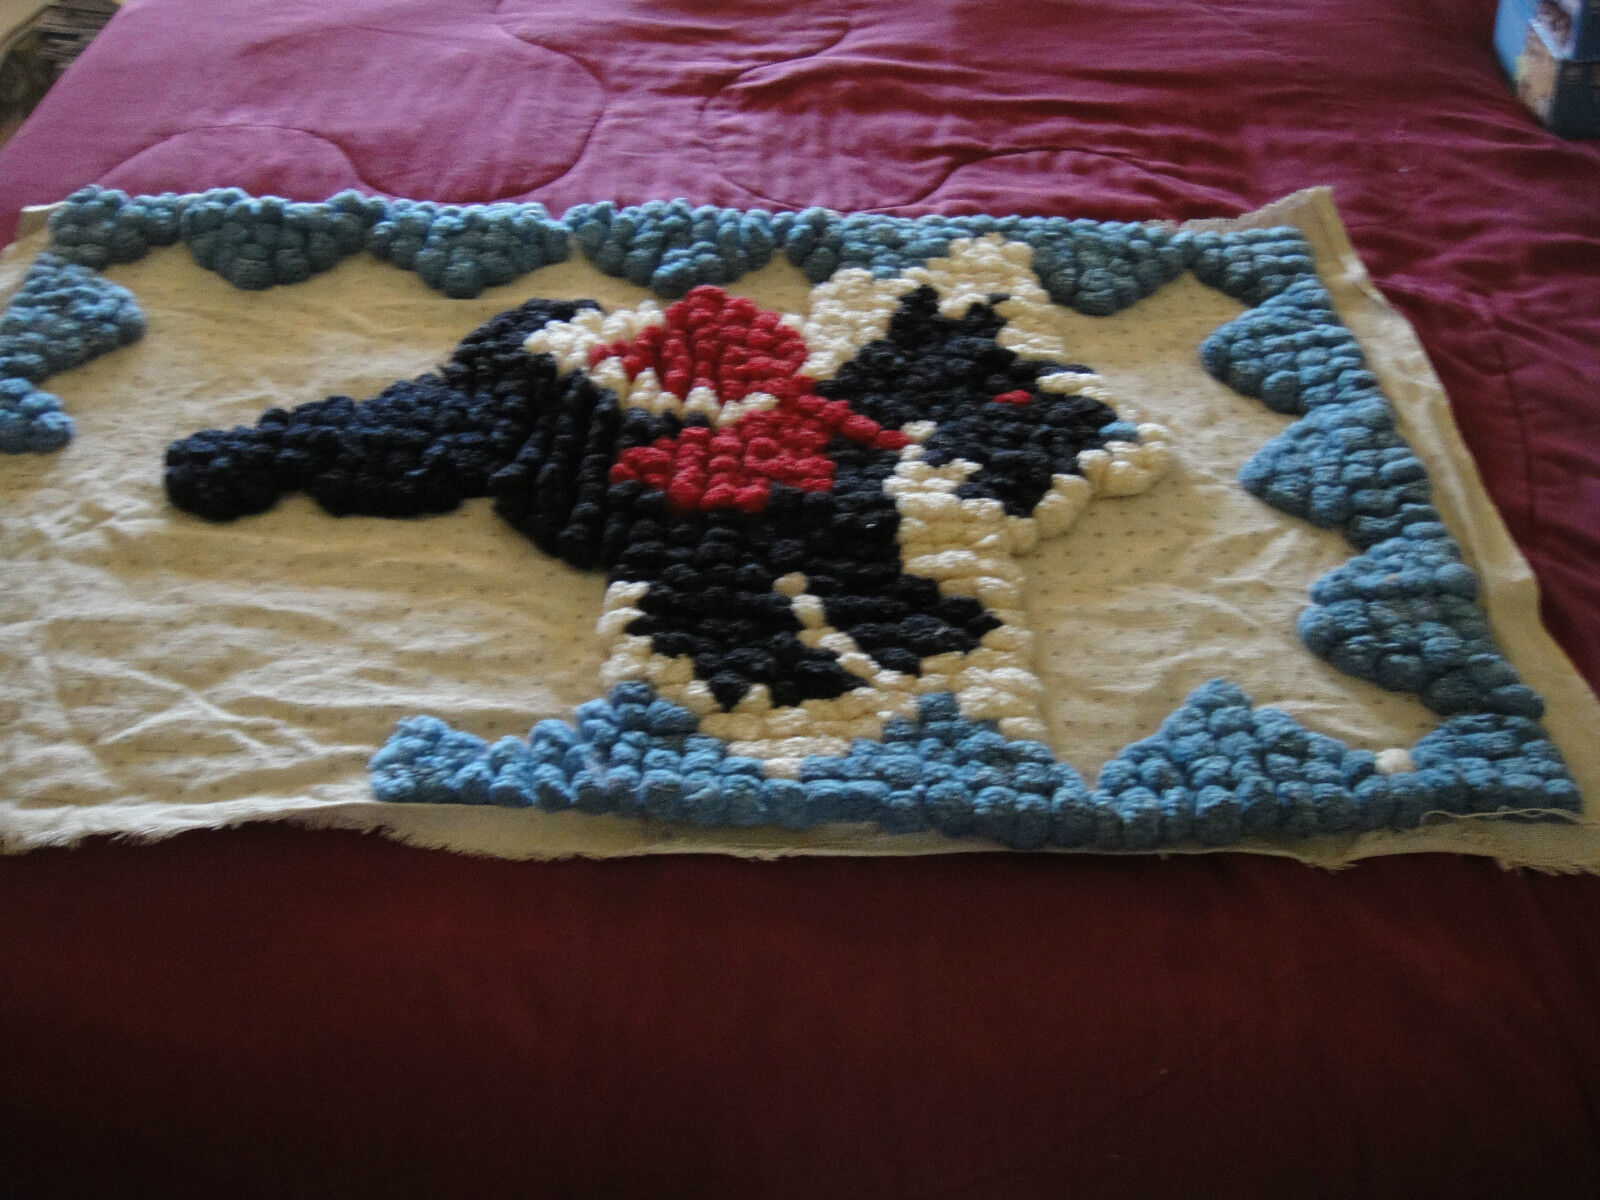 Vintage 1930s Handmade Pom Pom Rug Wall Hanging Scottie Dog Partially Completed